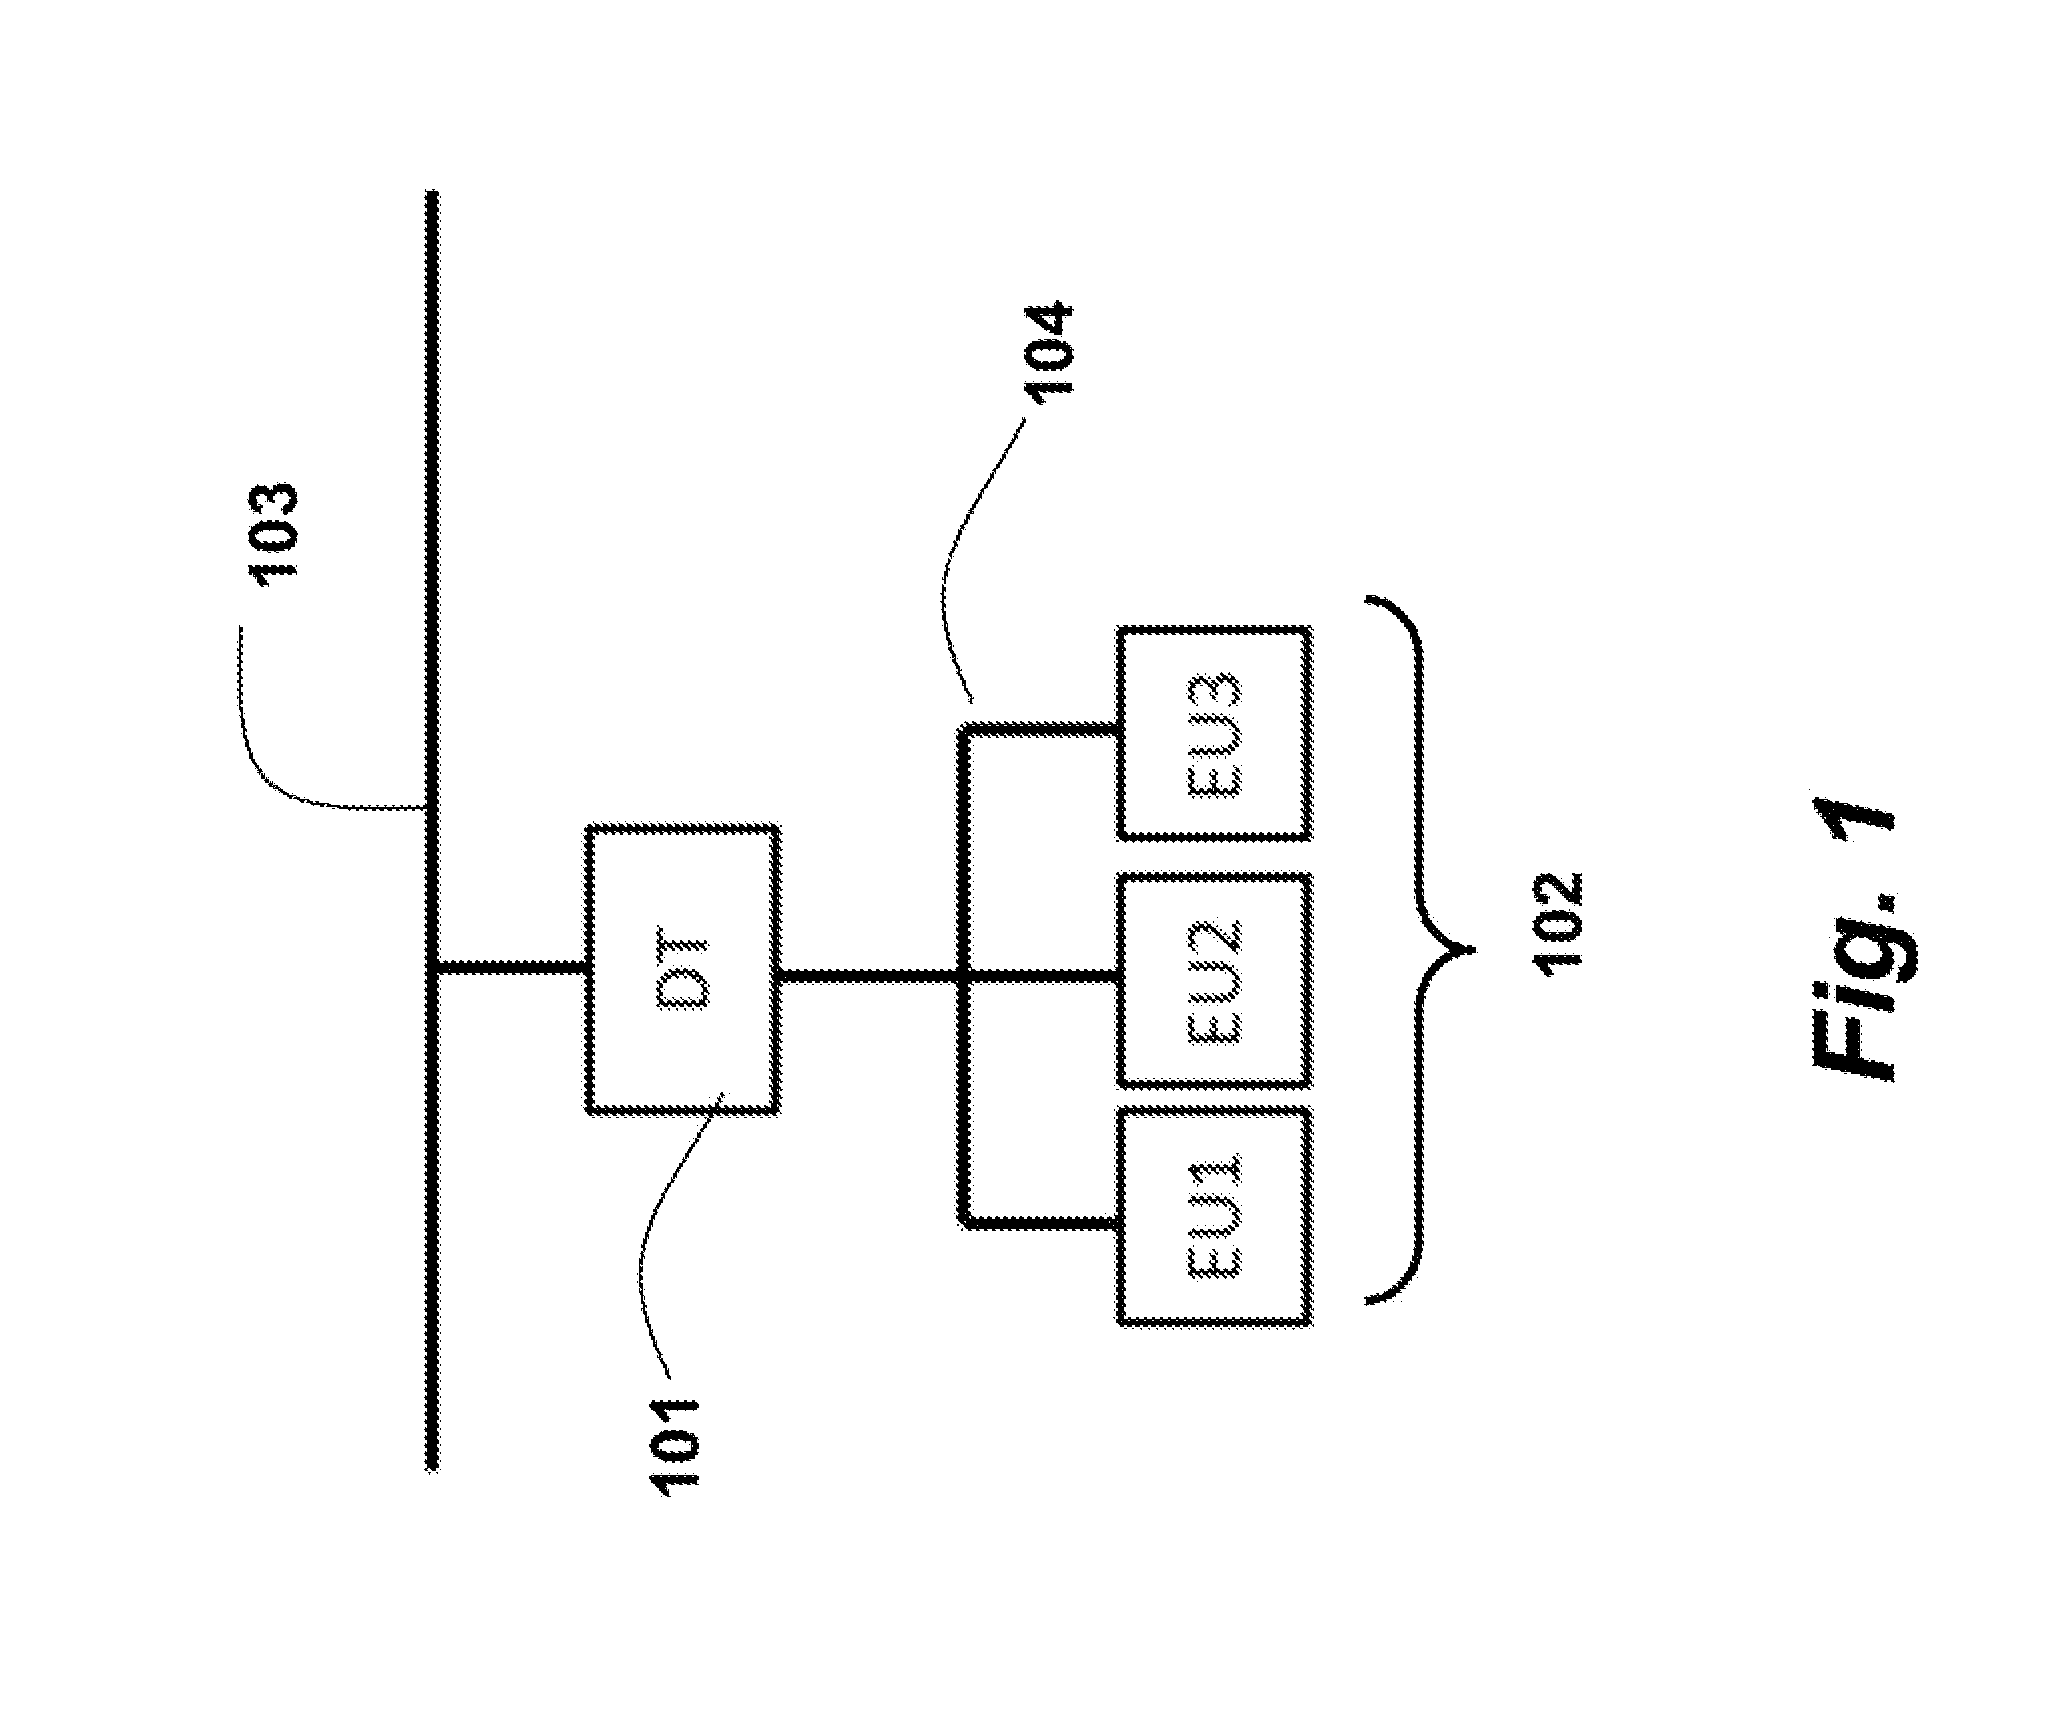 Method for Detecting Power Theft in a Power Distribution System